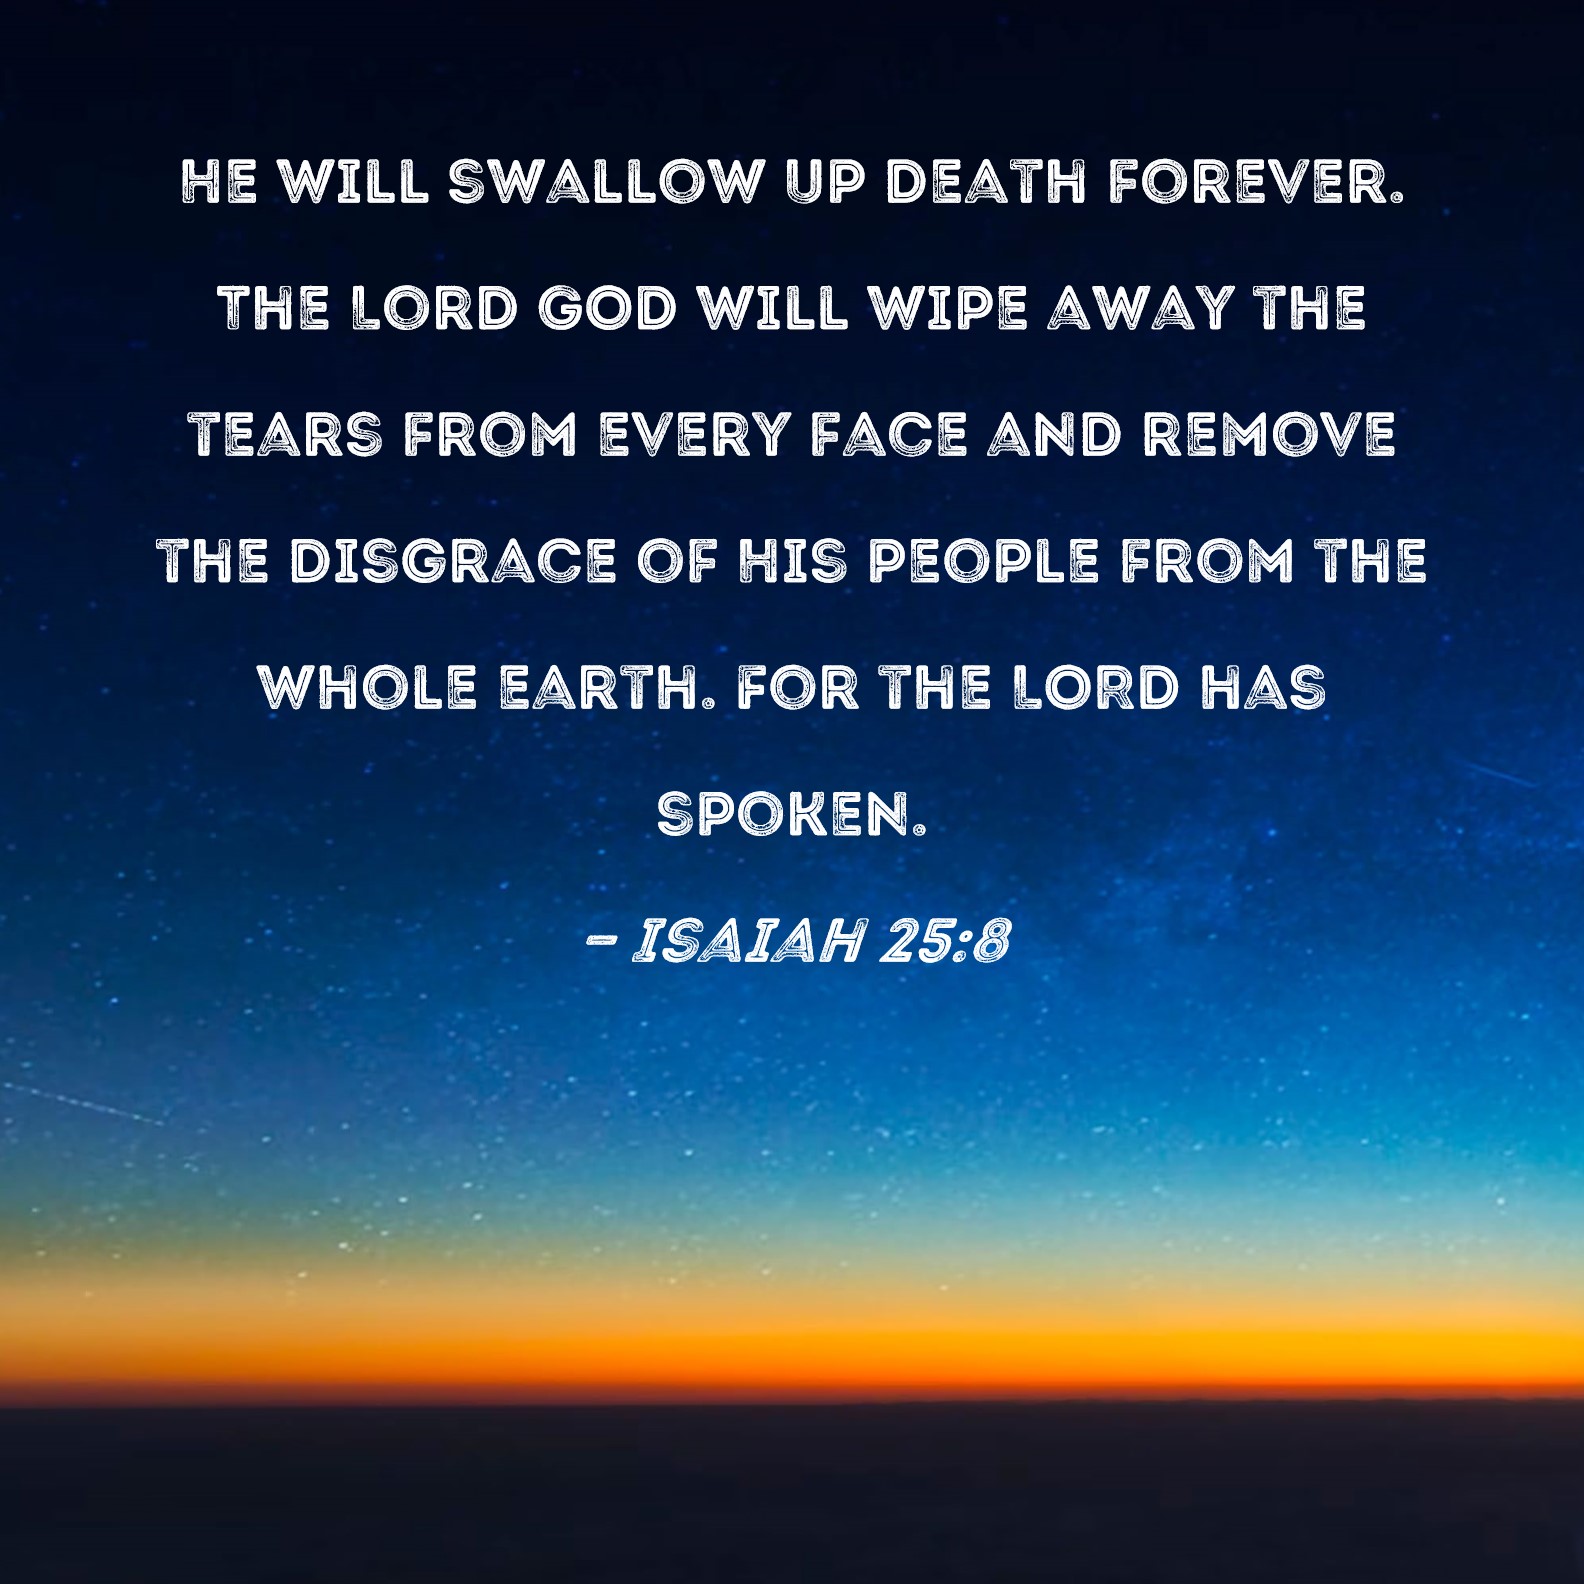 Isaiah 25:8 He will swallow up death forever. The Lord GOD will